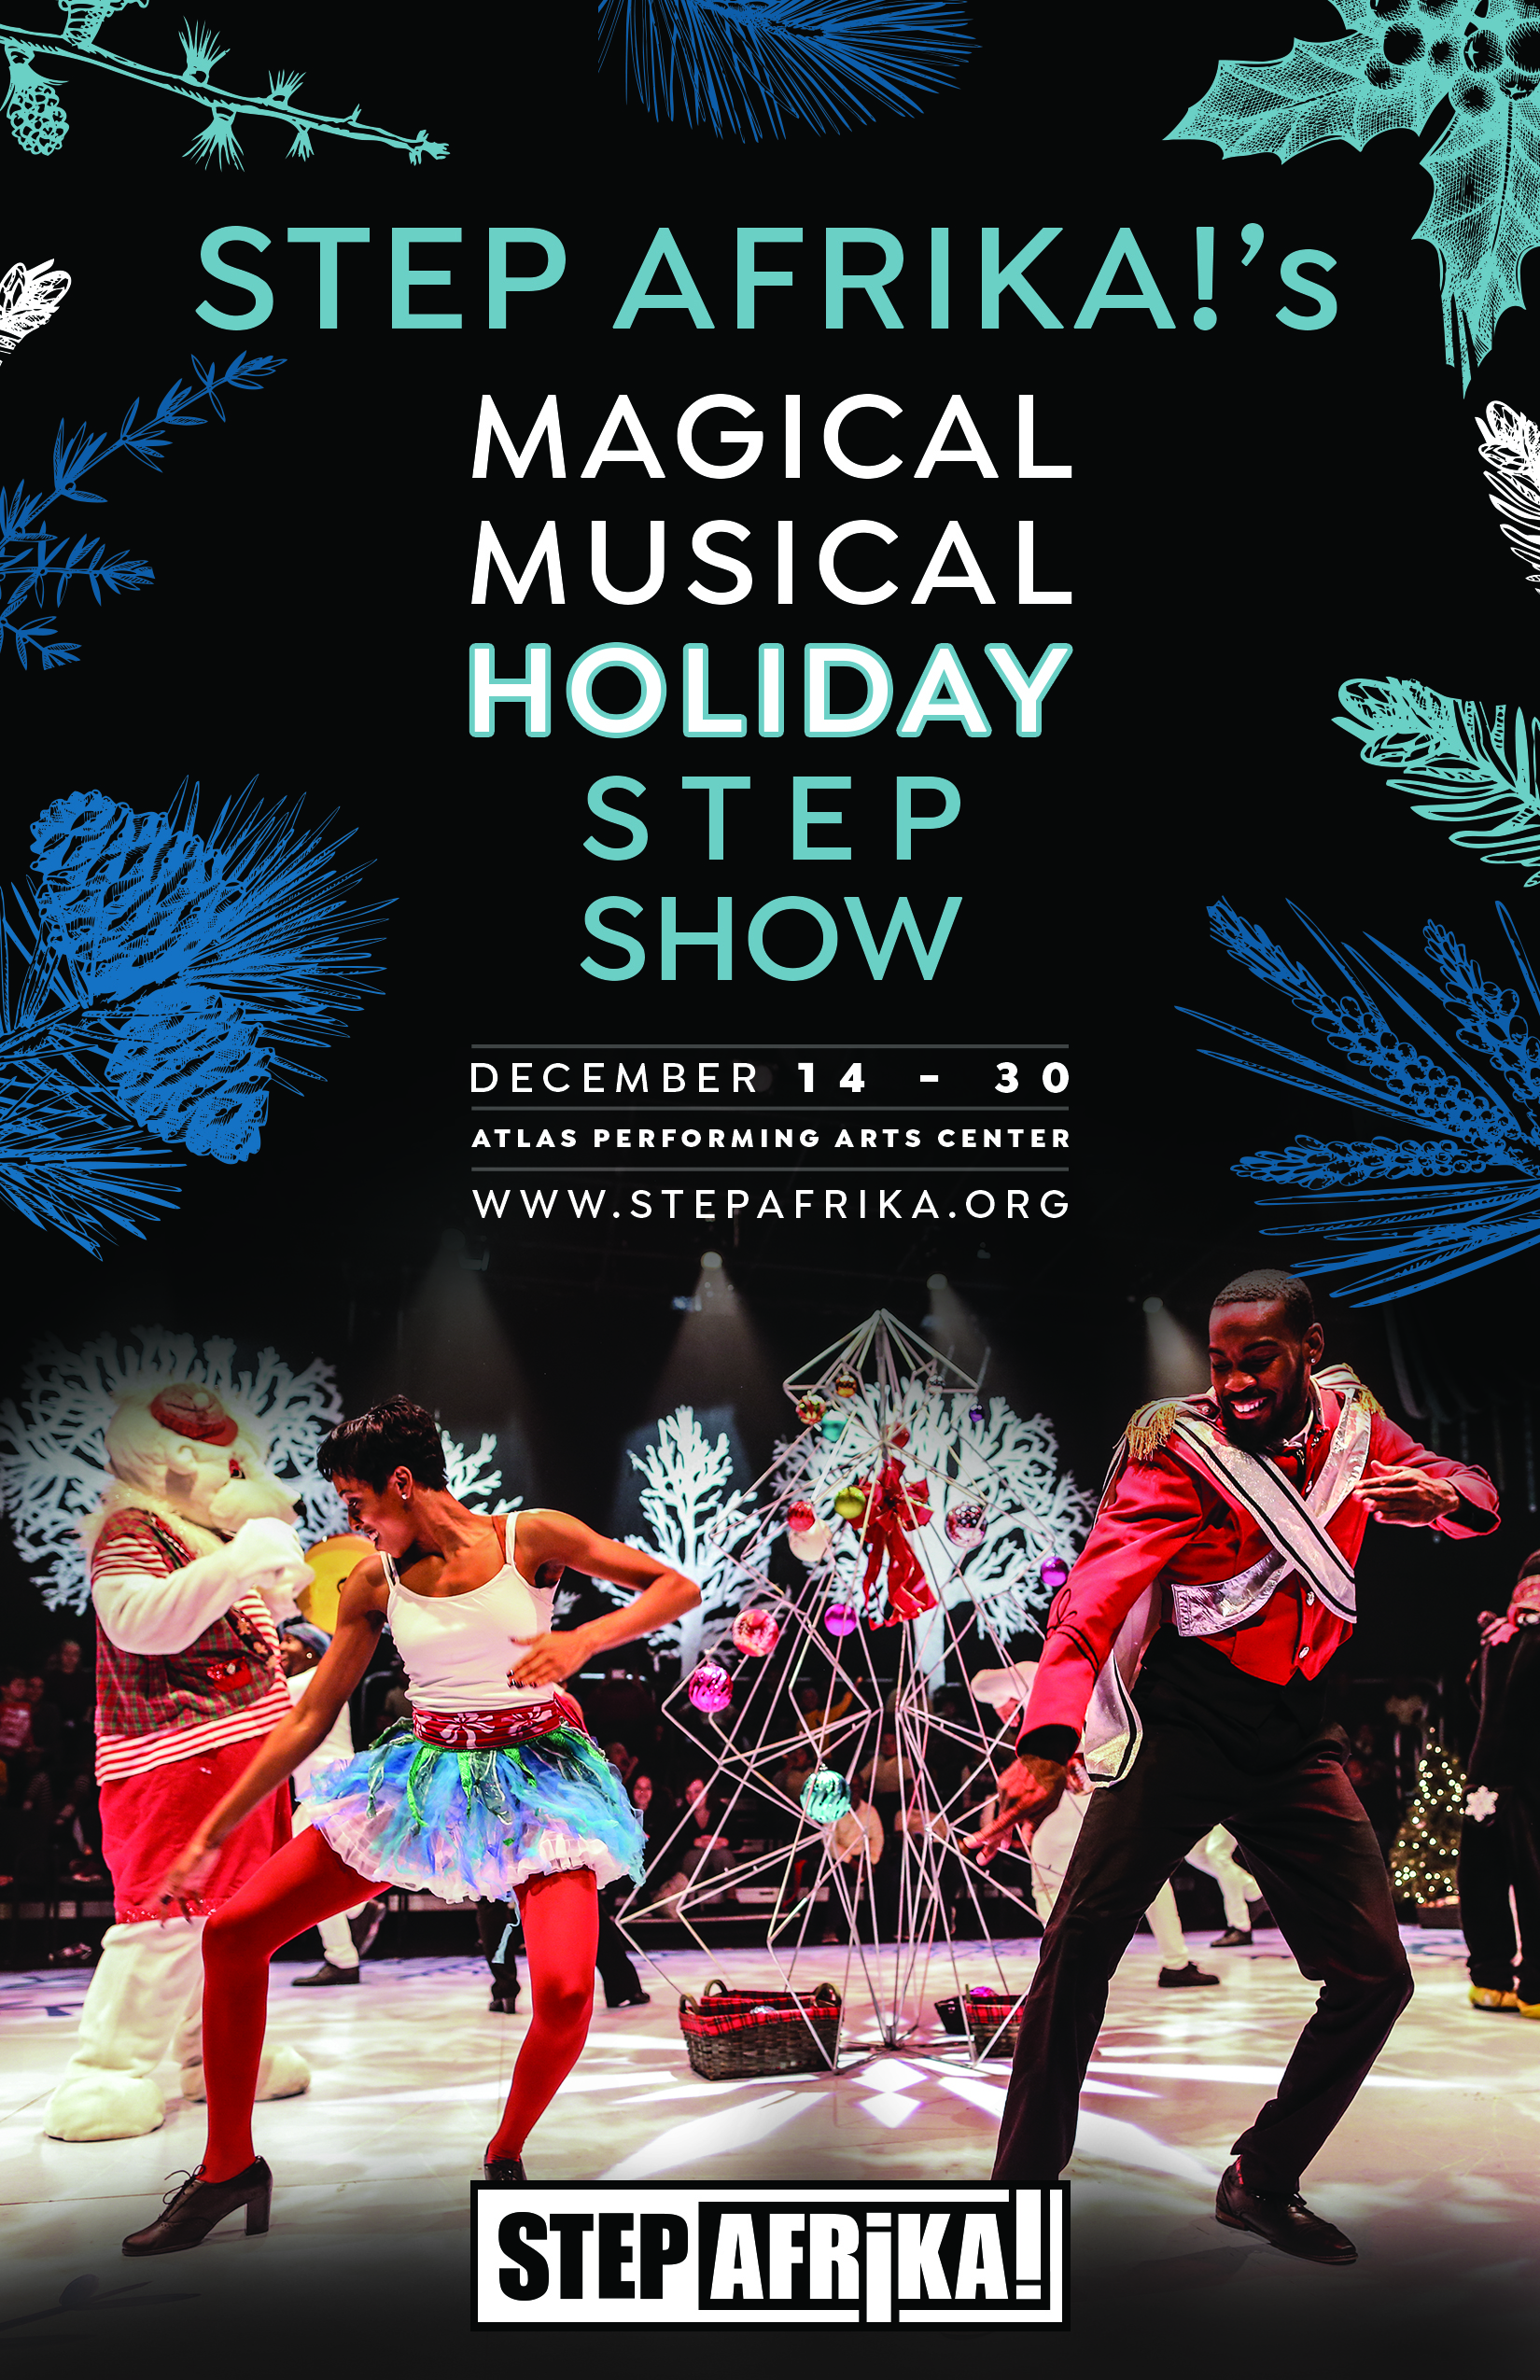 Step Afrika! Holiday Show on December 14 - 30 2018 - Howard Alumnus C. Brian Williams founder  and photo credit 